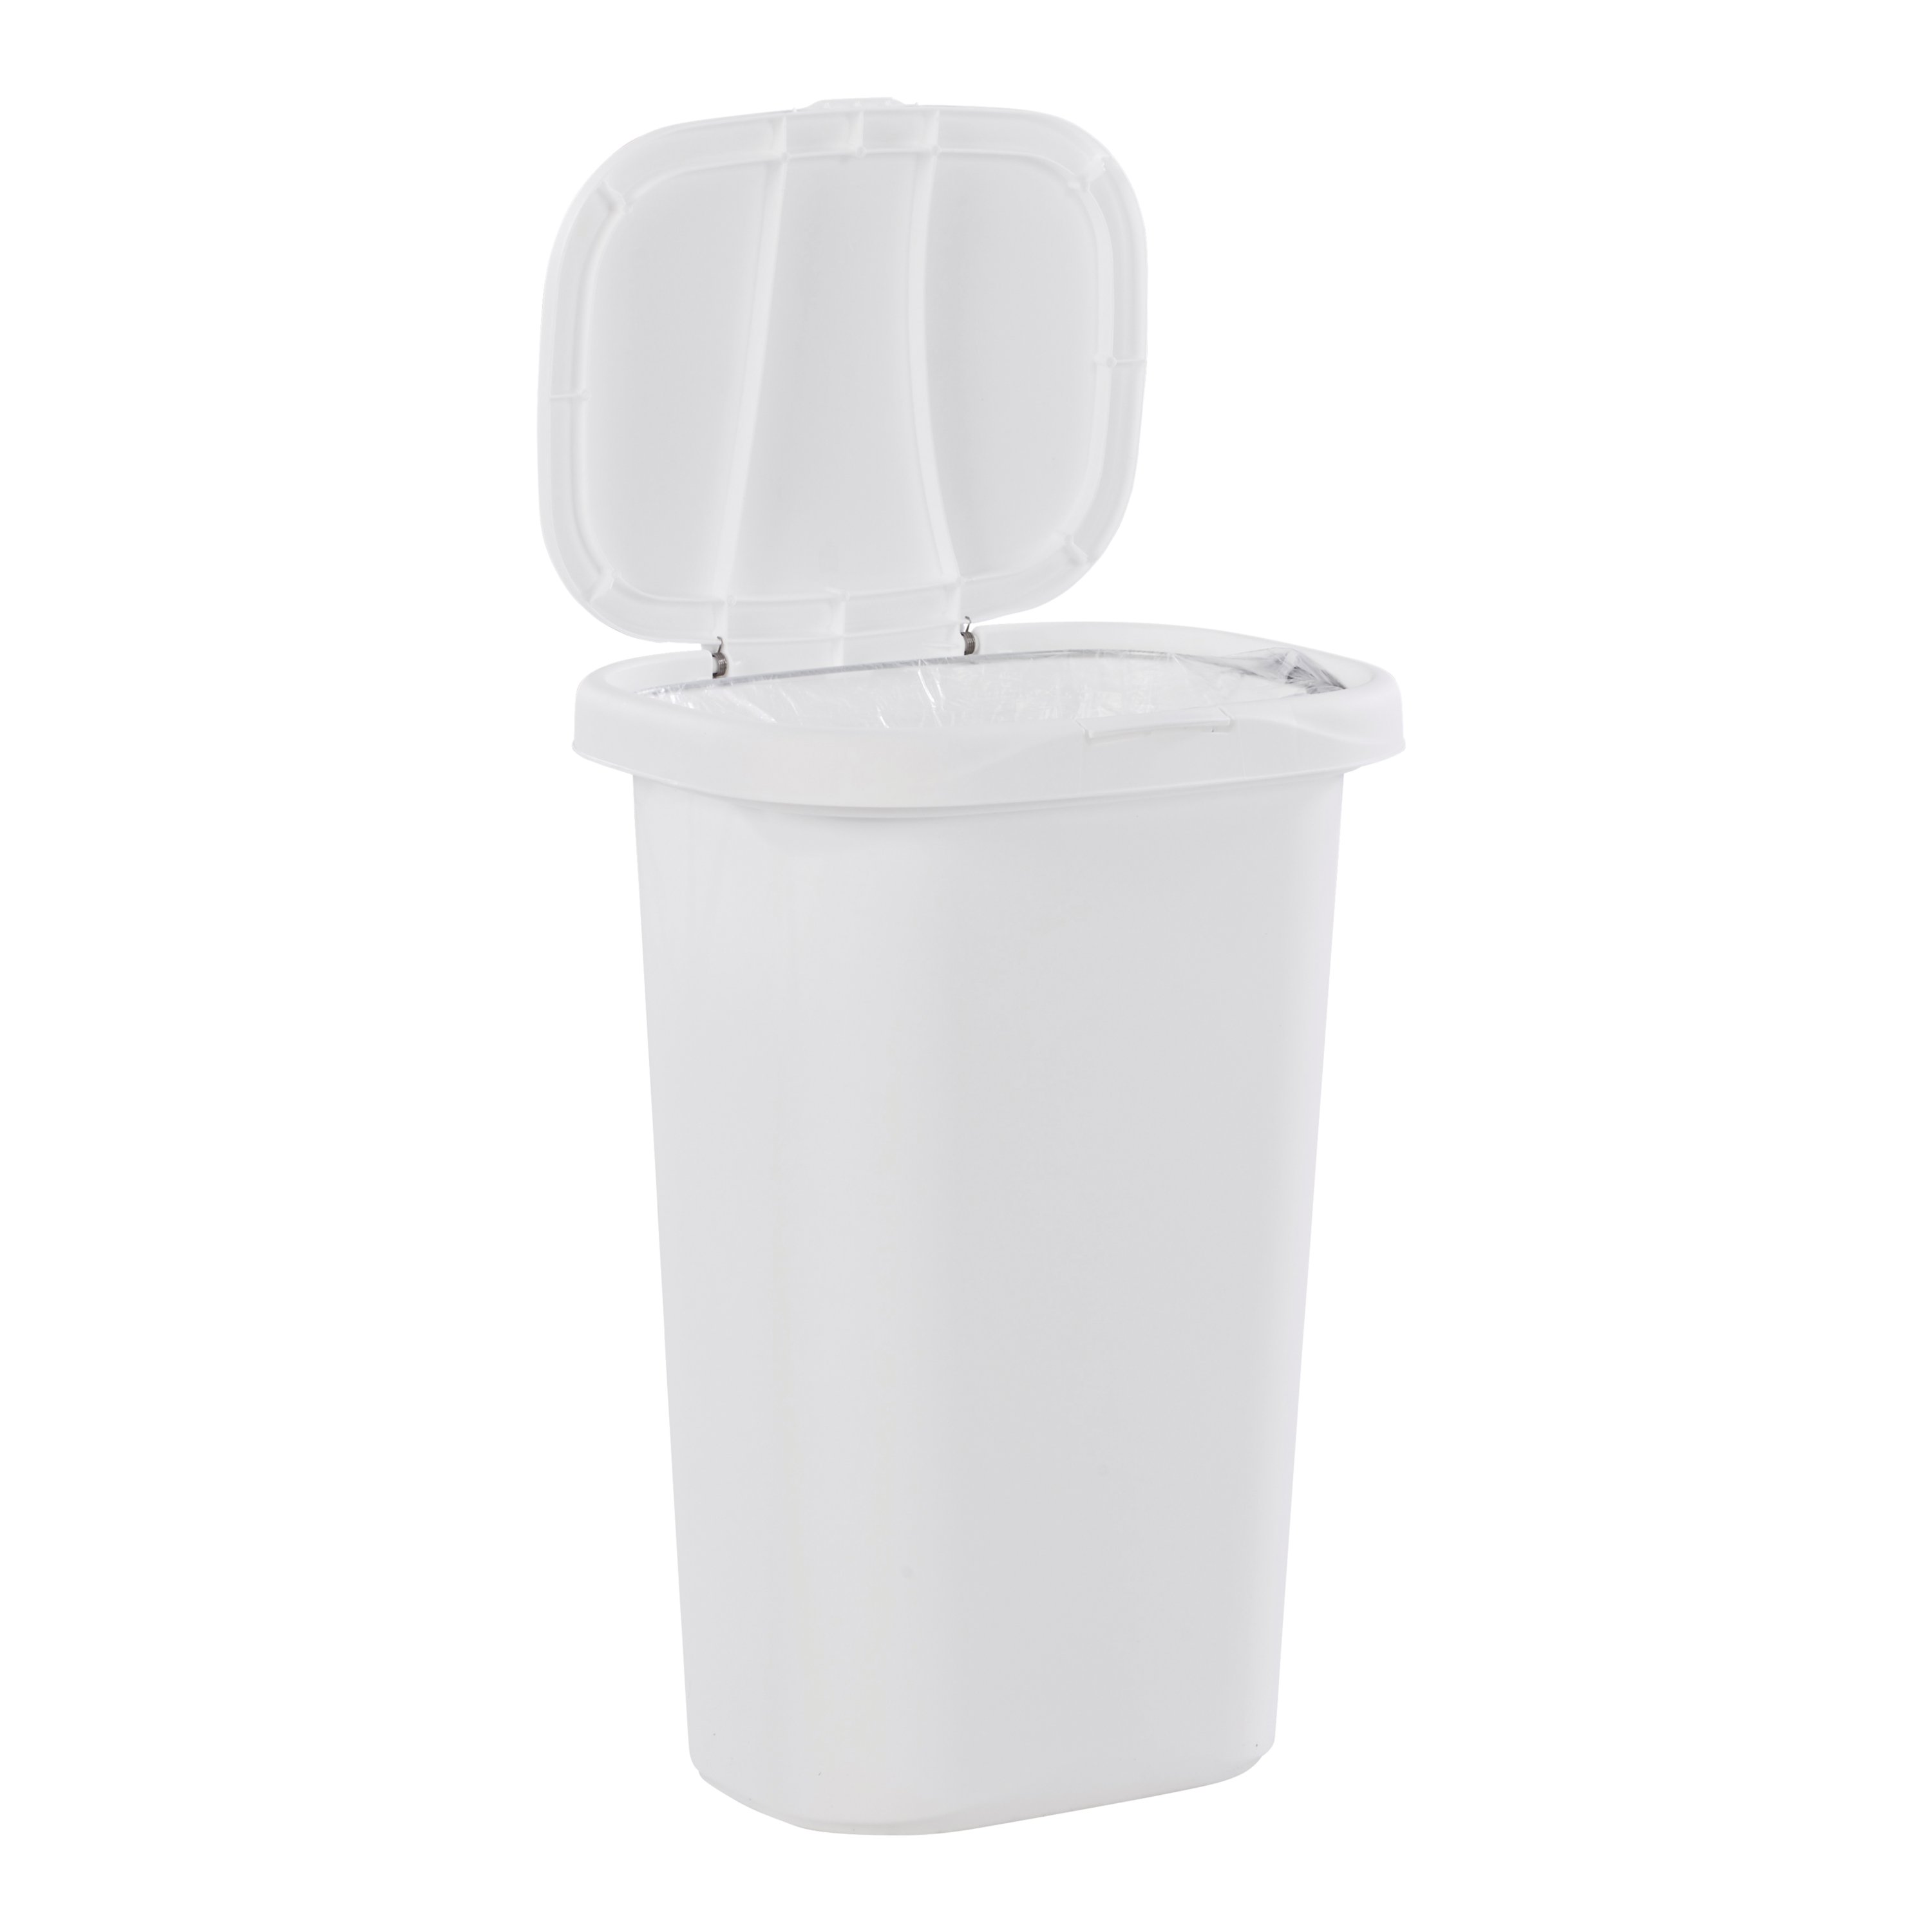  Rubbermaid Spring Top Kitchen Bathroom Trash Can with Lid, 13- Gallon, White, Plastic Garbage Bin/Wastebasket for  Home/Kitchen/Bathroom/Garage : Everything Else